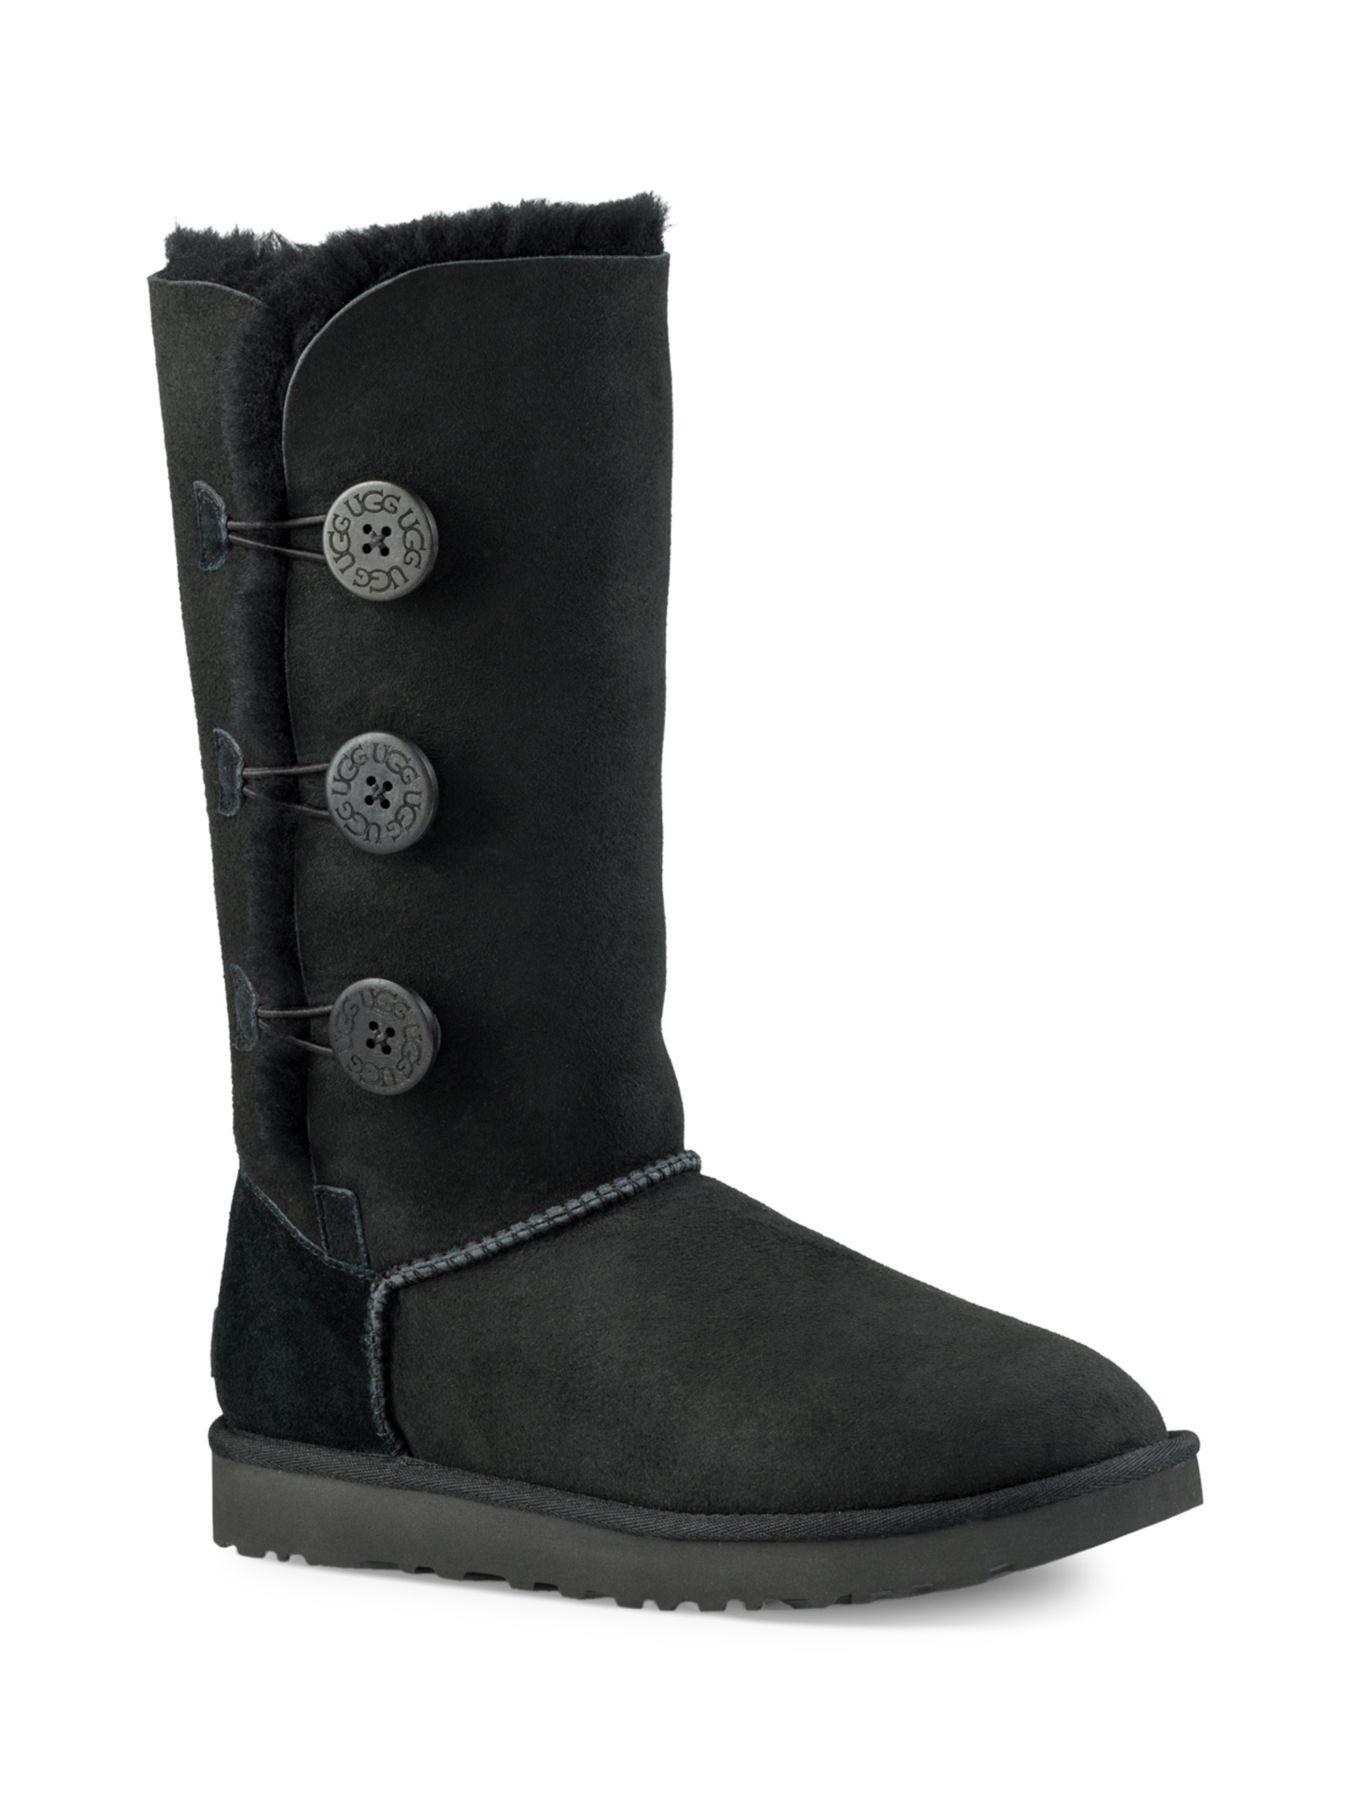 UGG Bailey Button Triplet Sheepskin-lined Suede Boots in Black - Lyst